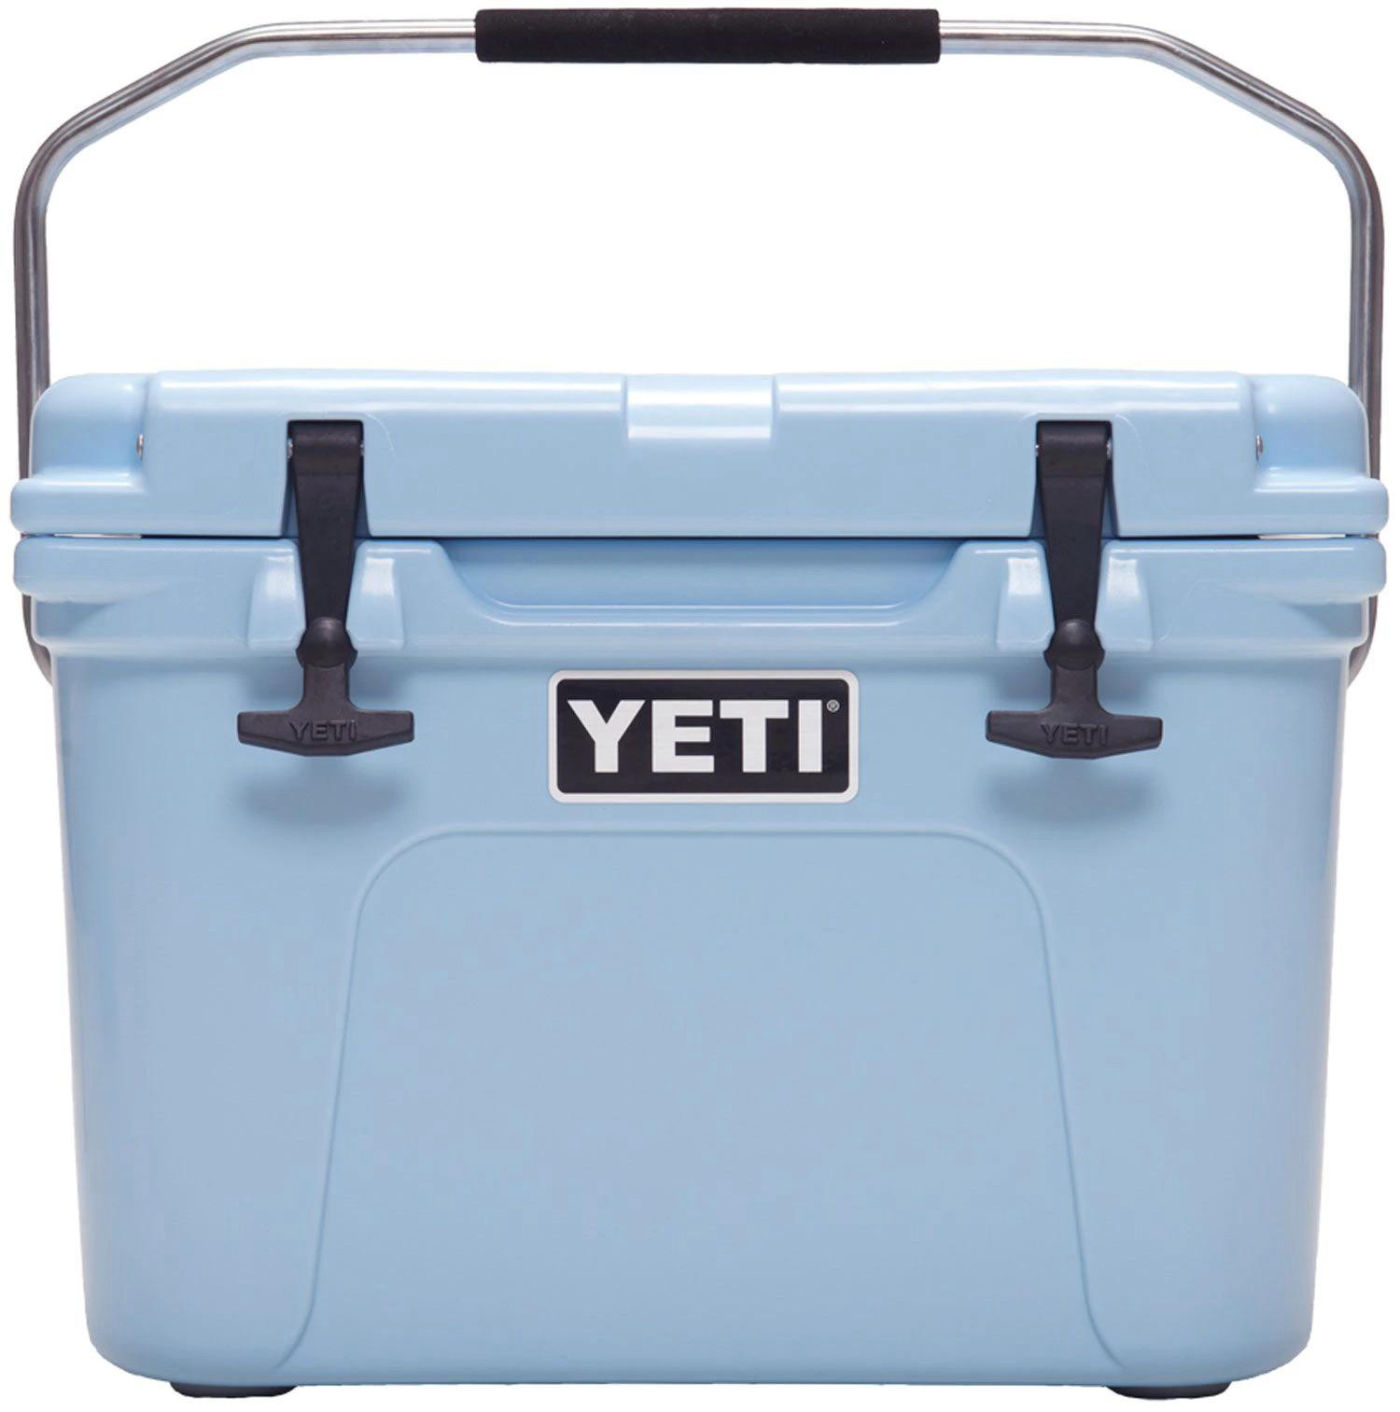 Picture Of Winner Of Yeti Cooler